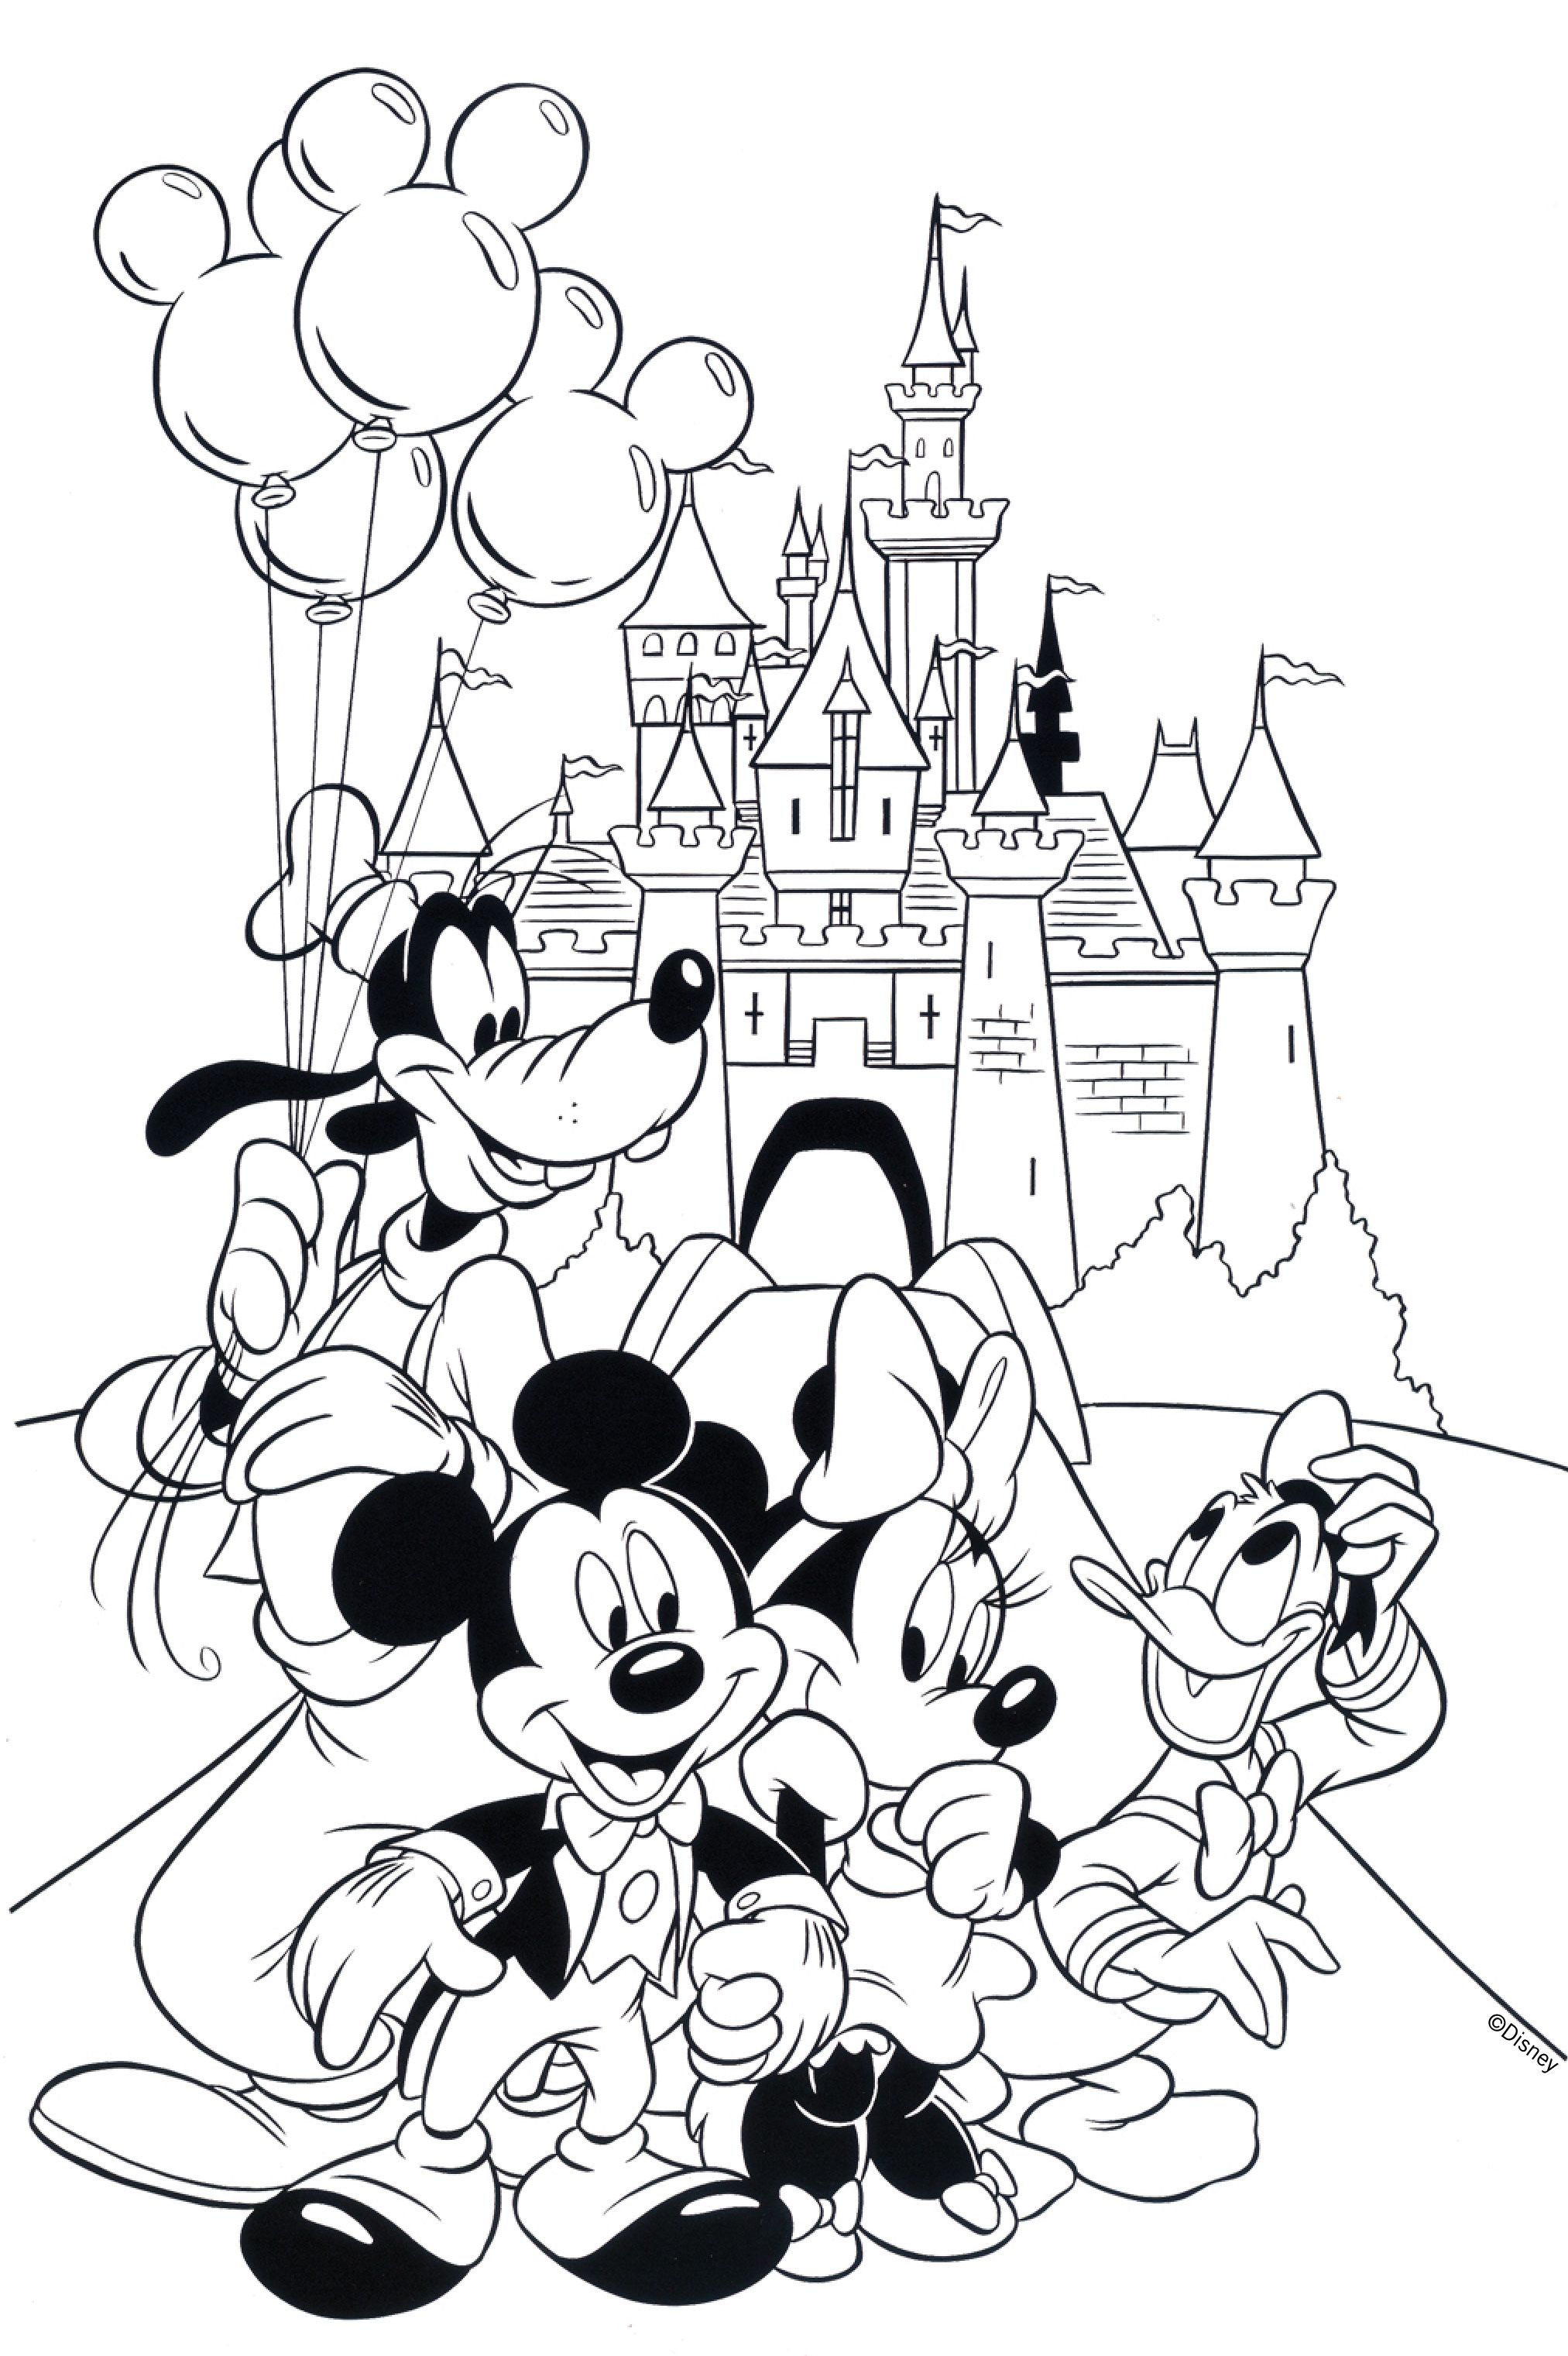 Free disney coloring page printable disney coloring pages mickey mouse coloring pages cartoon coloring pages